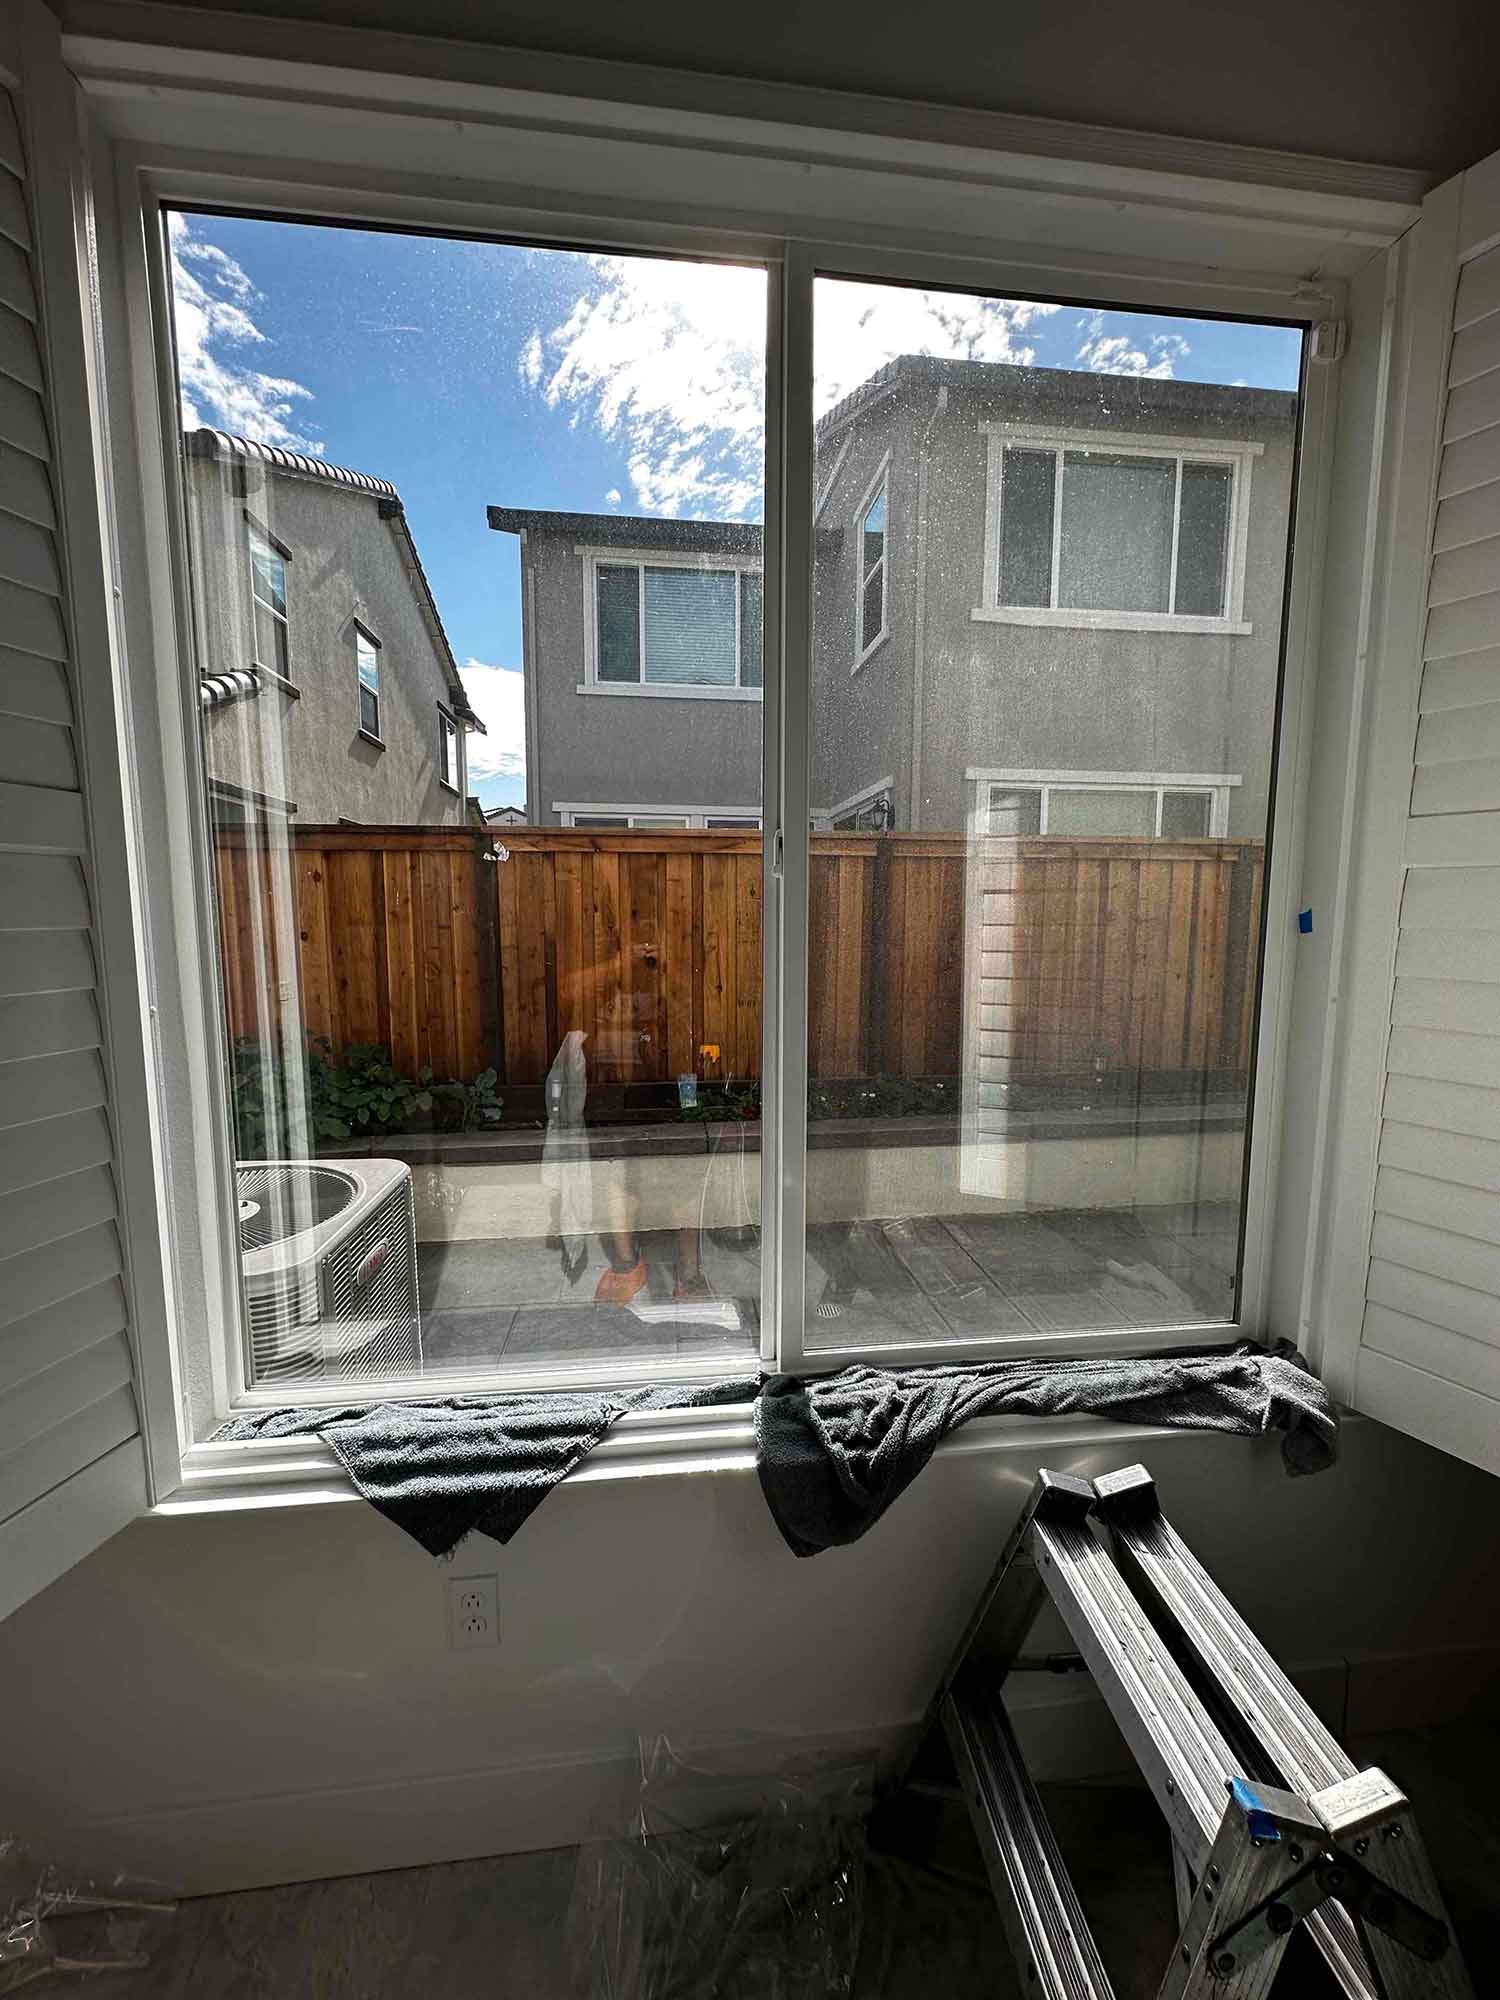 ClimatePro installed 3M Safety Window Film and Crimsafe on this Brentwood, CA home.